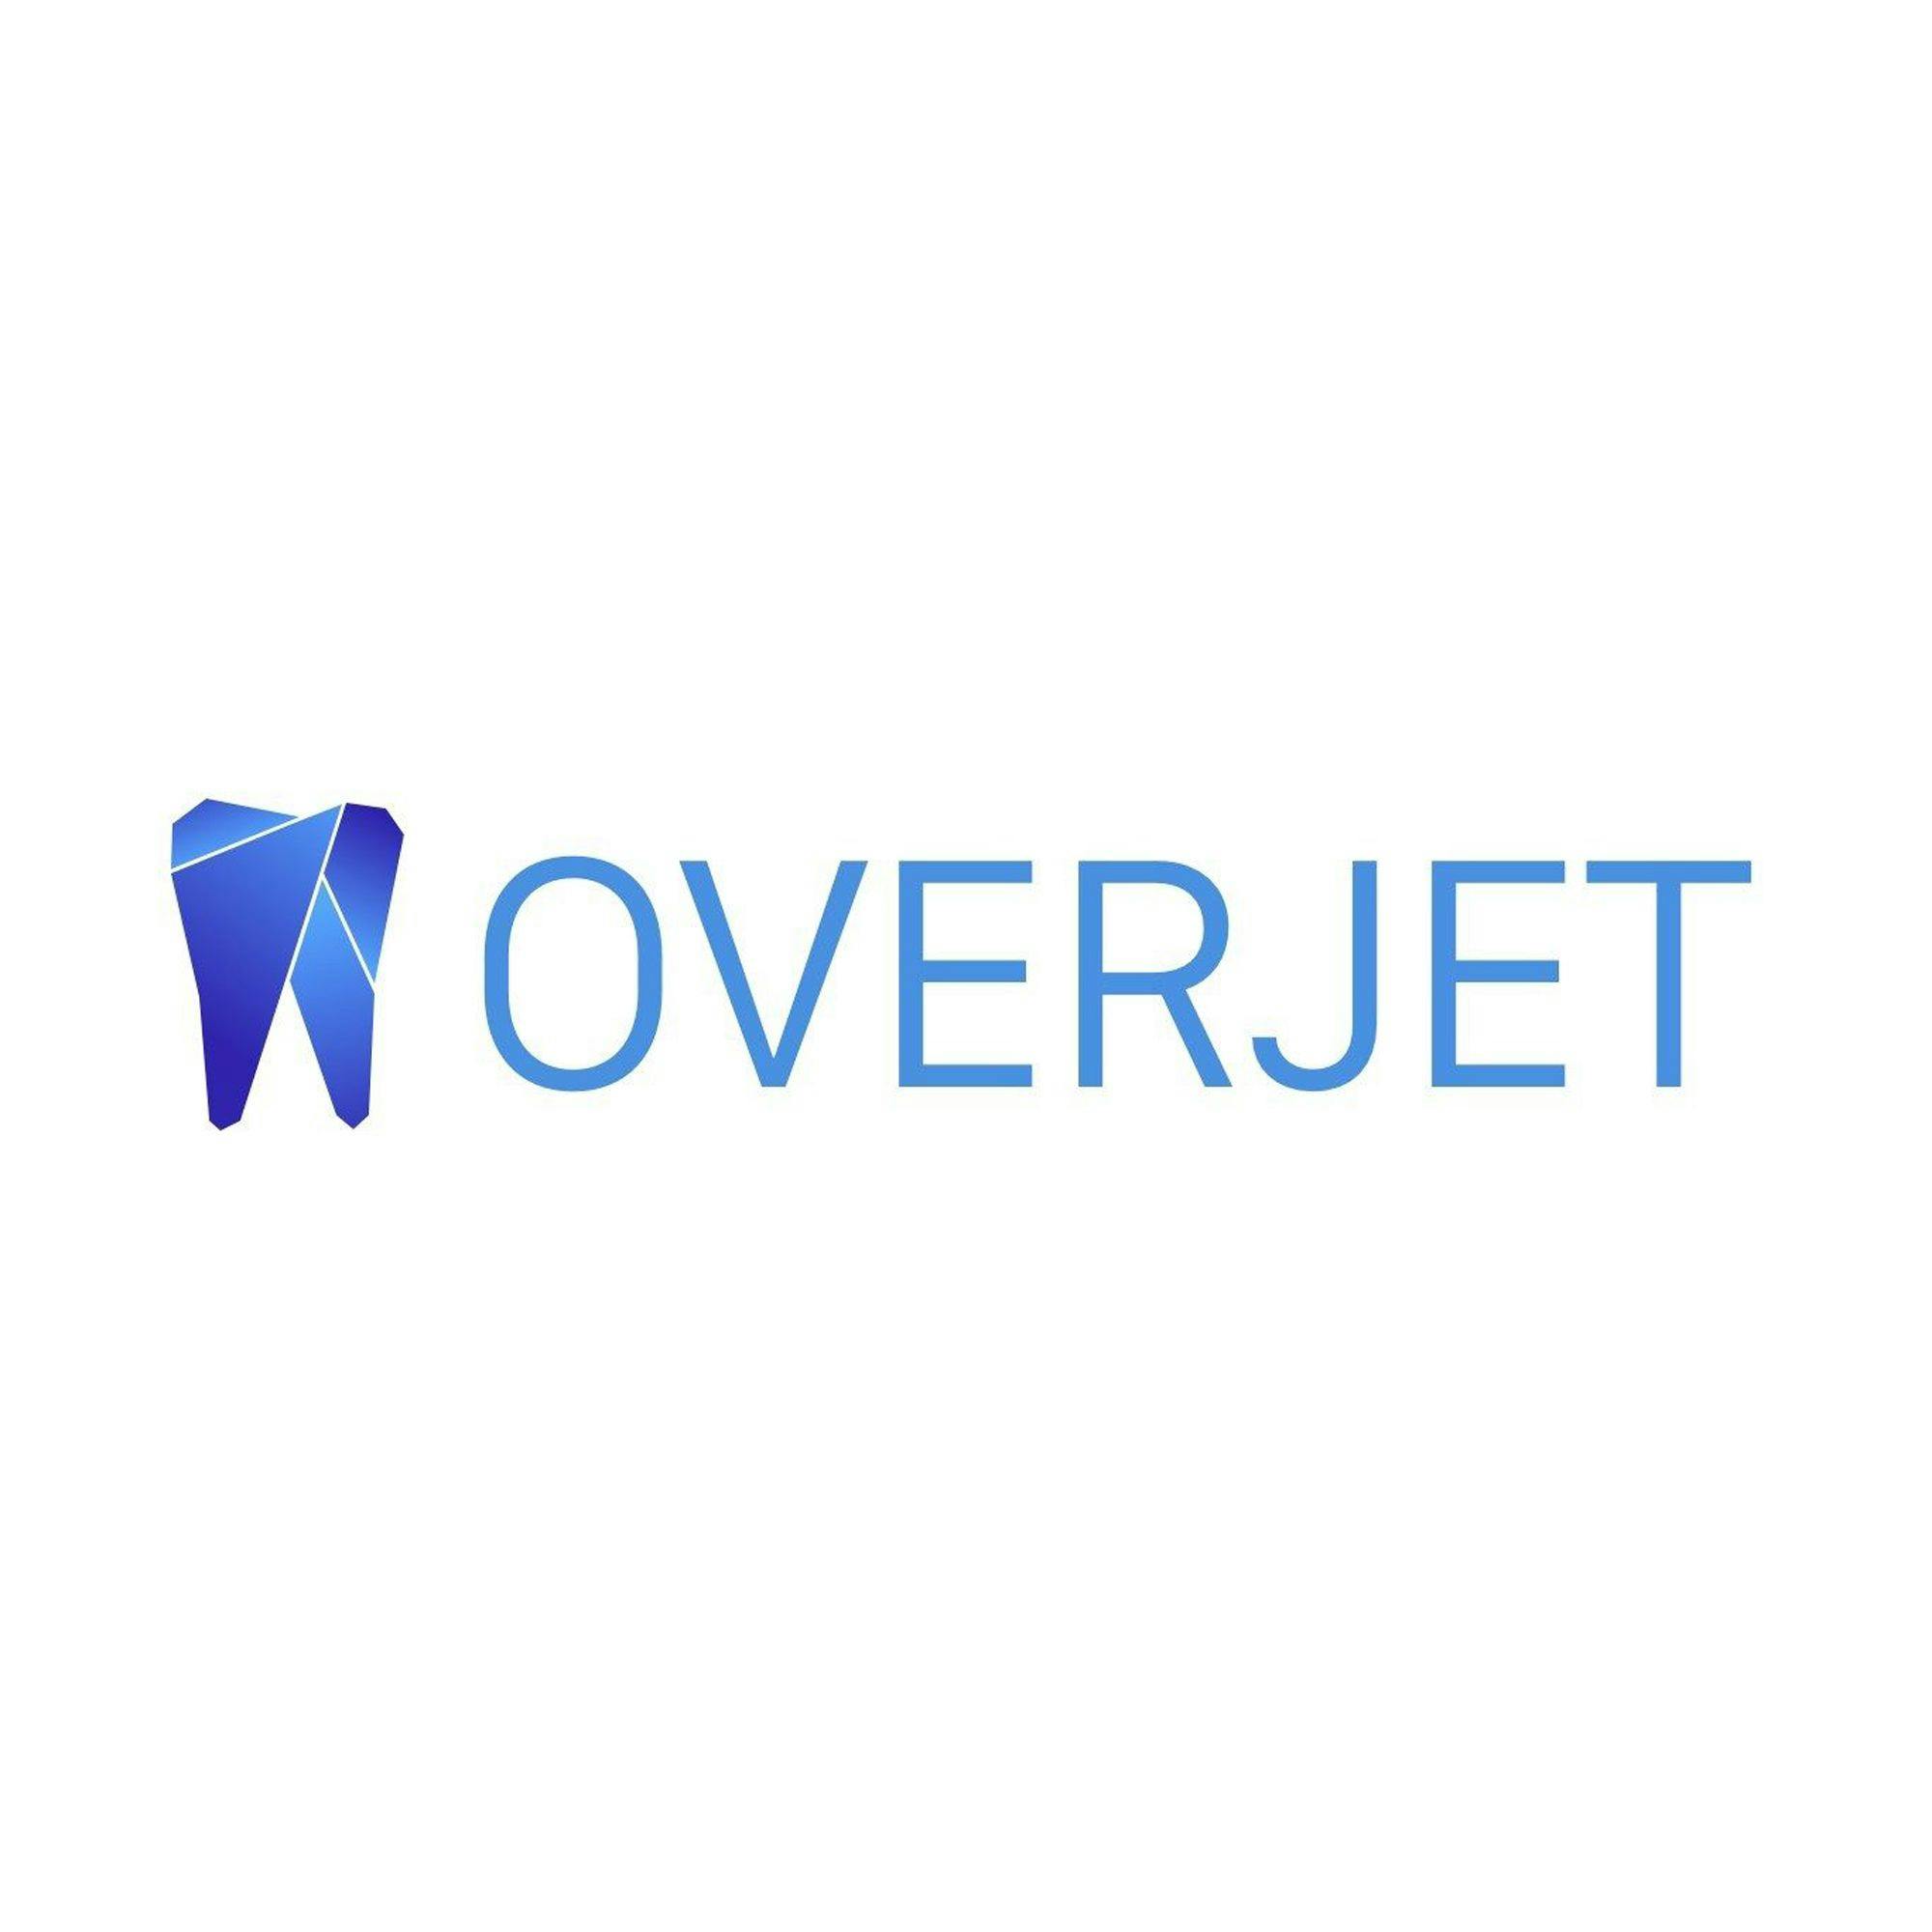 Overjet Announces Patent for its Artificial Intelligence Dental X-ray Technology